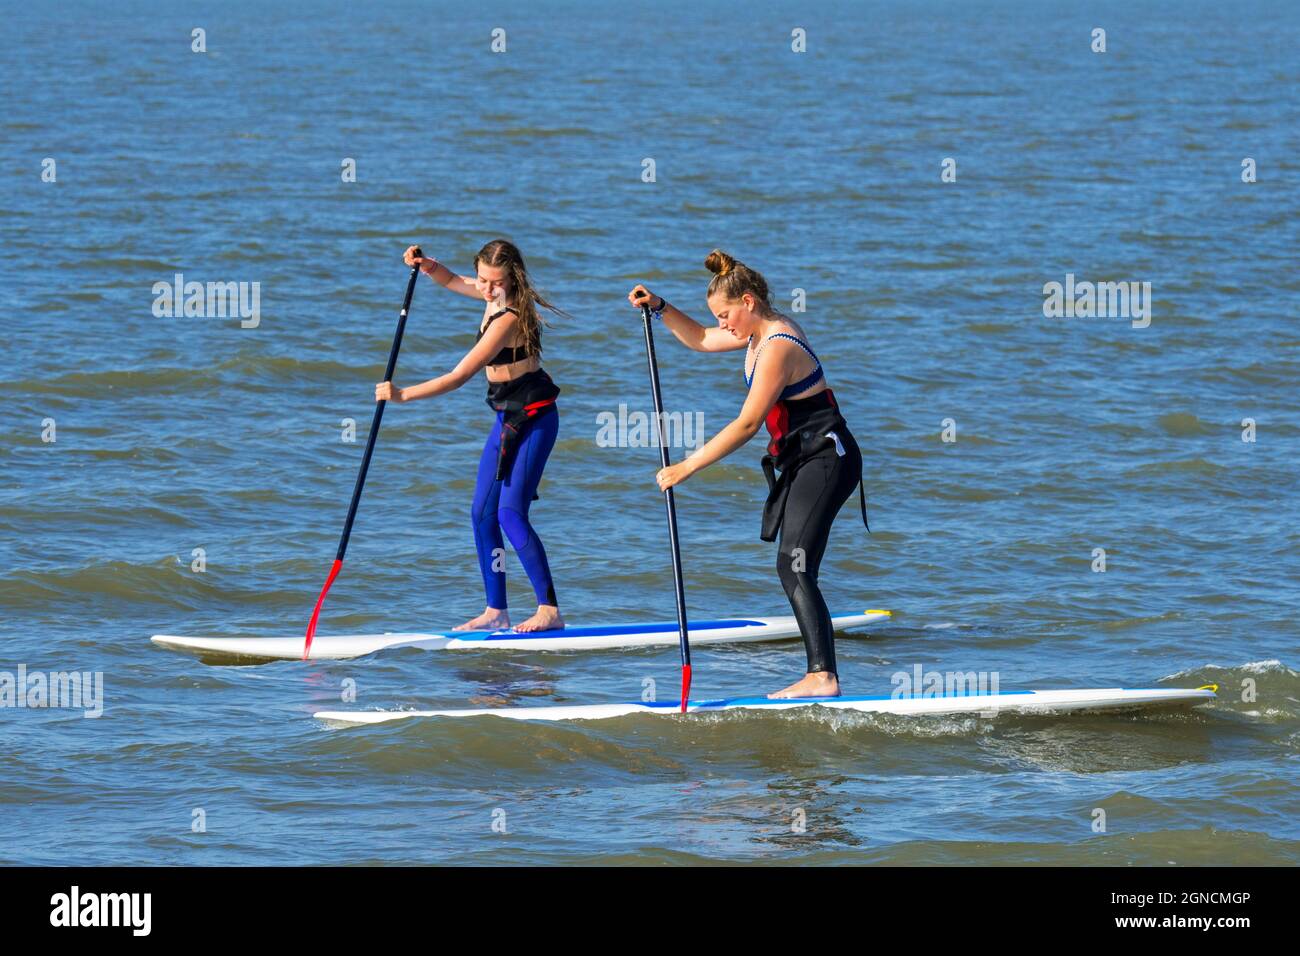 Two female paddleboarders practicing the water sport standup paddleboarding / stand up paddle boarding / SUP along the North Sea coast Stock Photo